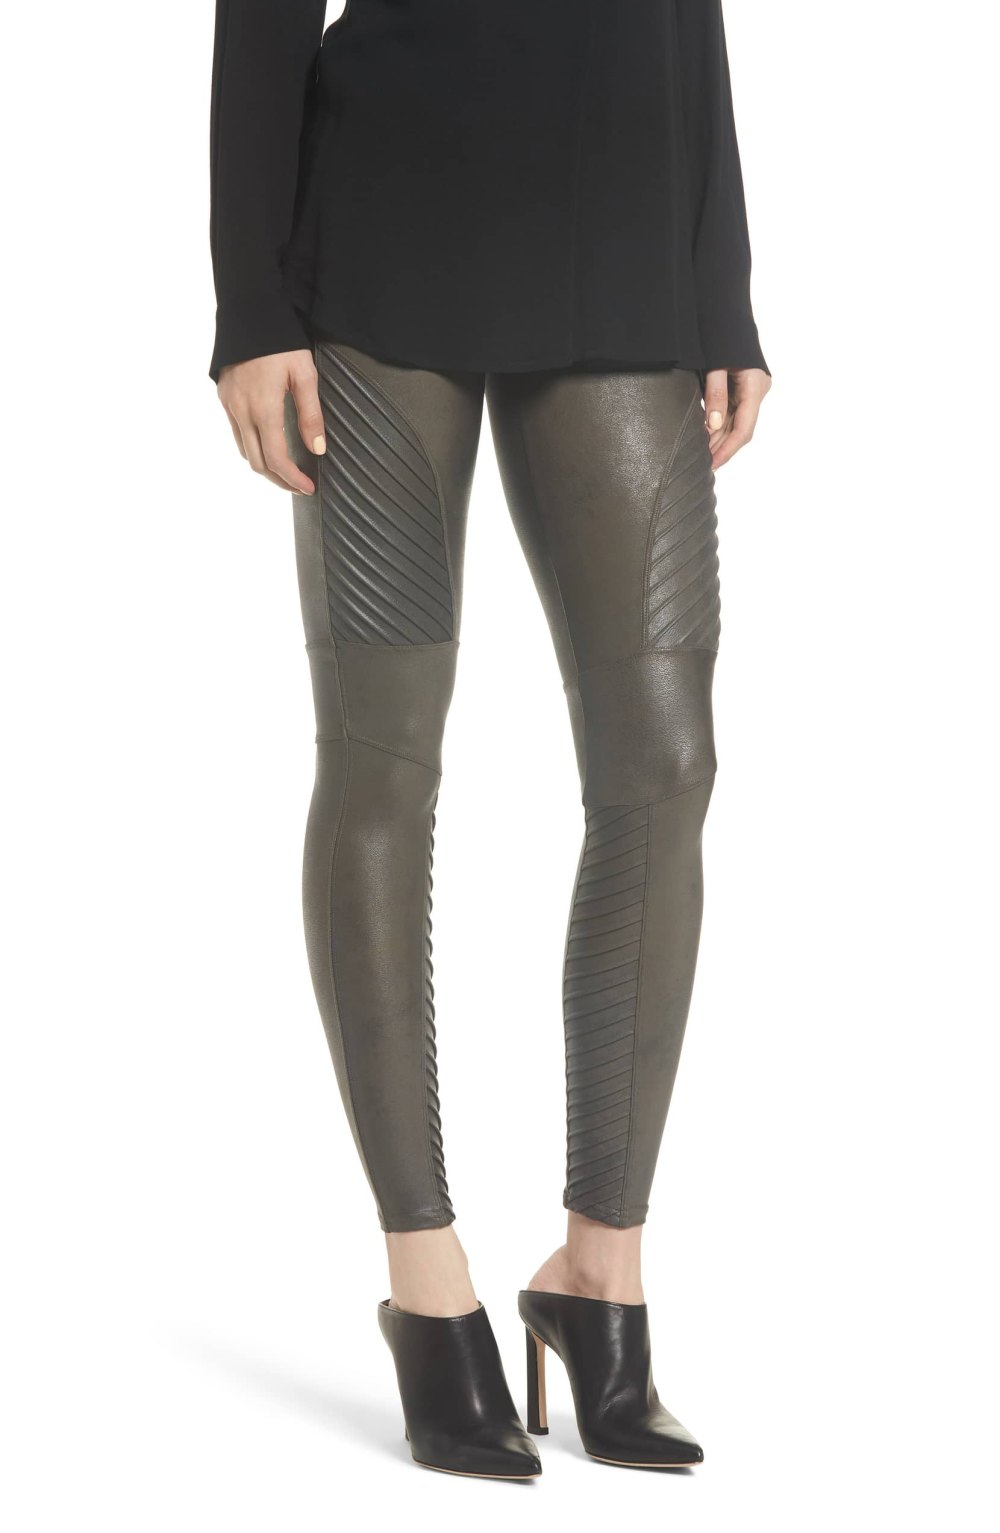 Shop Our Favorite Spanx Faux Leather Moto Leggings at Nordstrom | Us Weekly